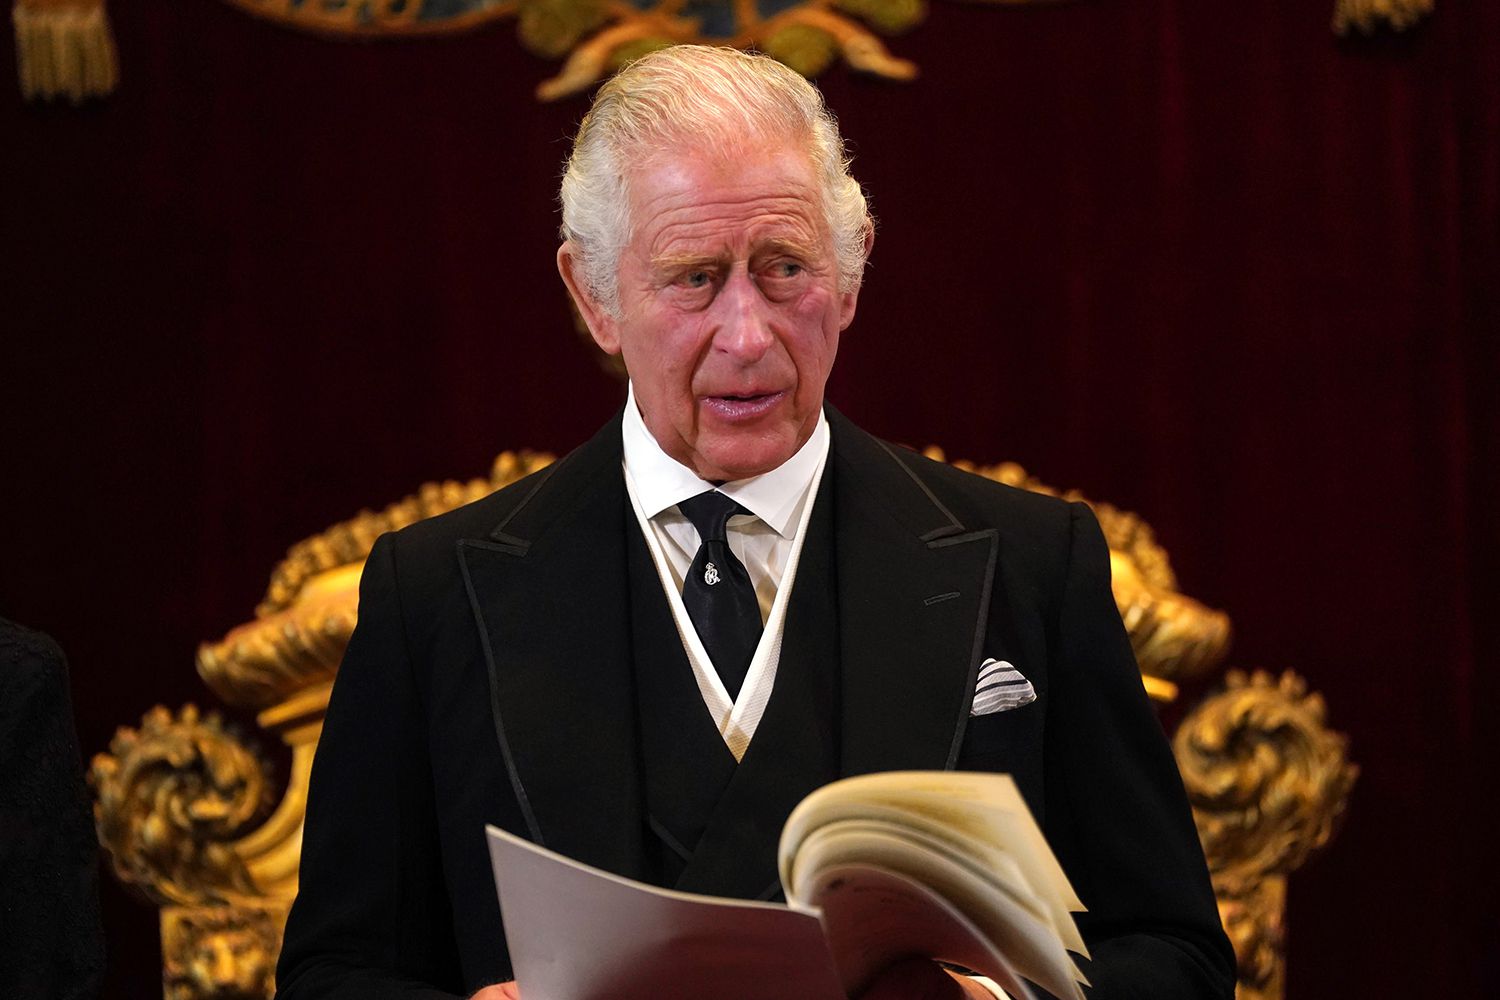 King Charles III reacts during his proclamation as King during the accession council on September 10, 2022 in London, United Kingdom. His Majesty The King is proclaimed at the Accession Council in the State Apartments of St James's Palace, London. 